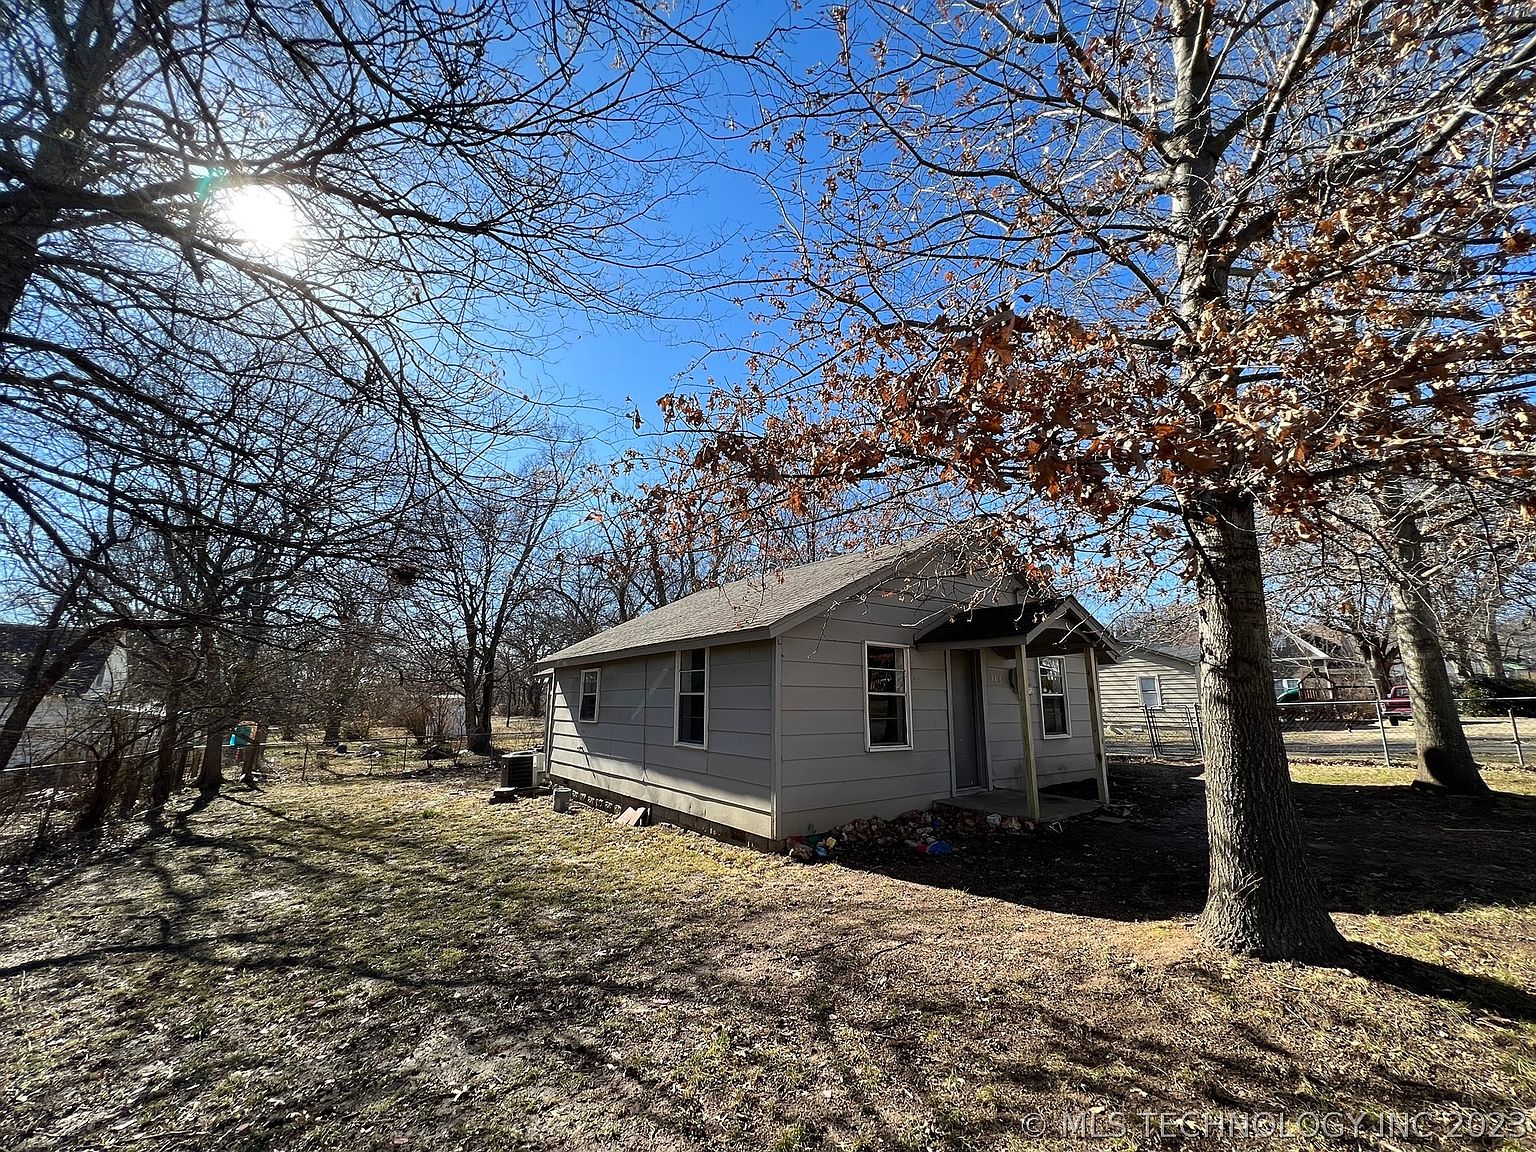 315 W Ross St, Tahlequah, OK 74464 | Zillow